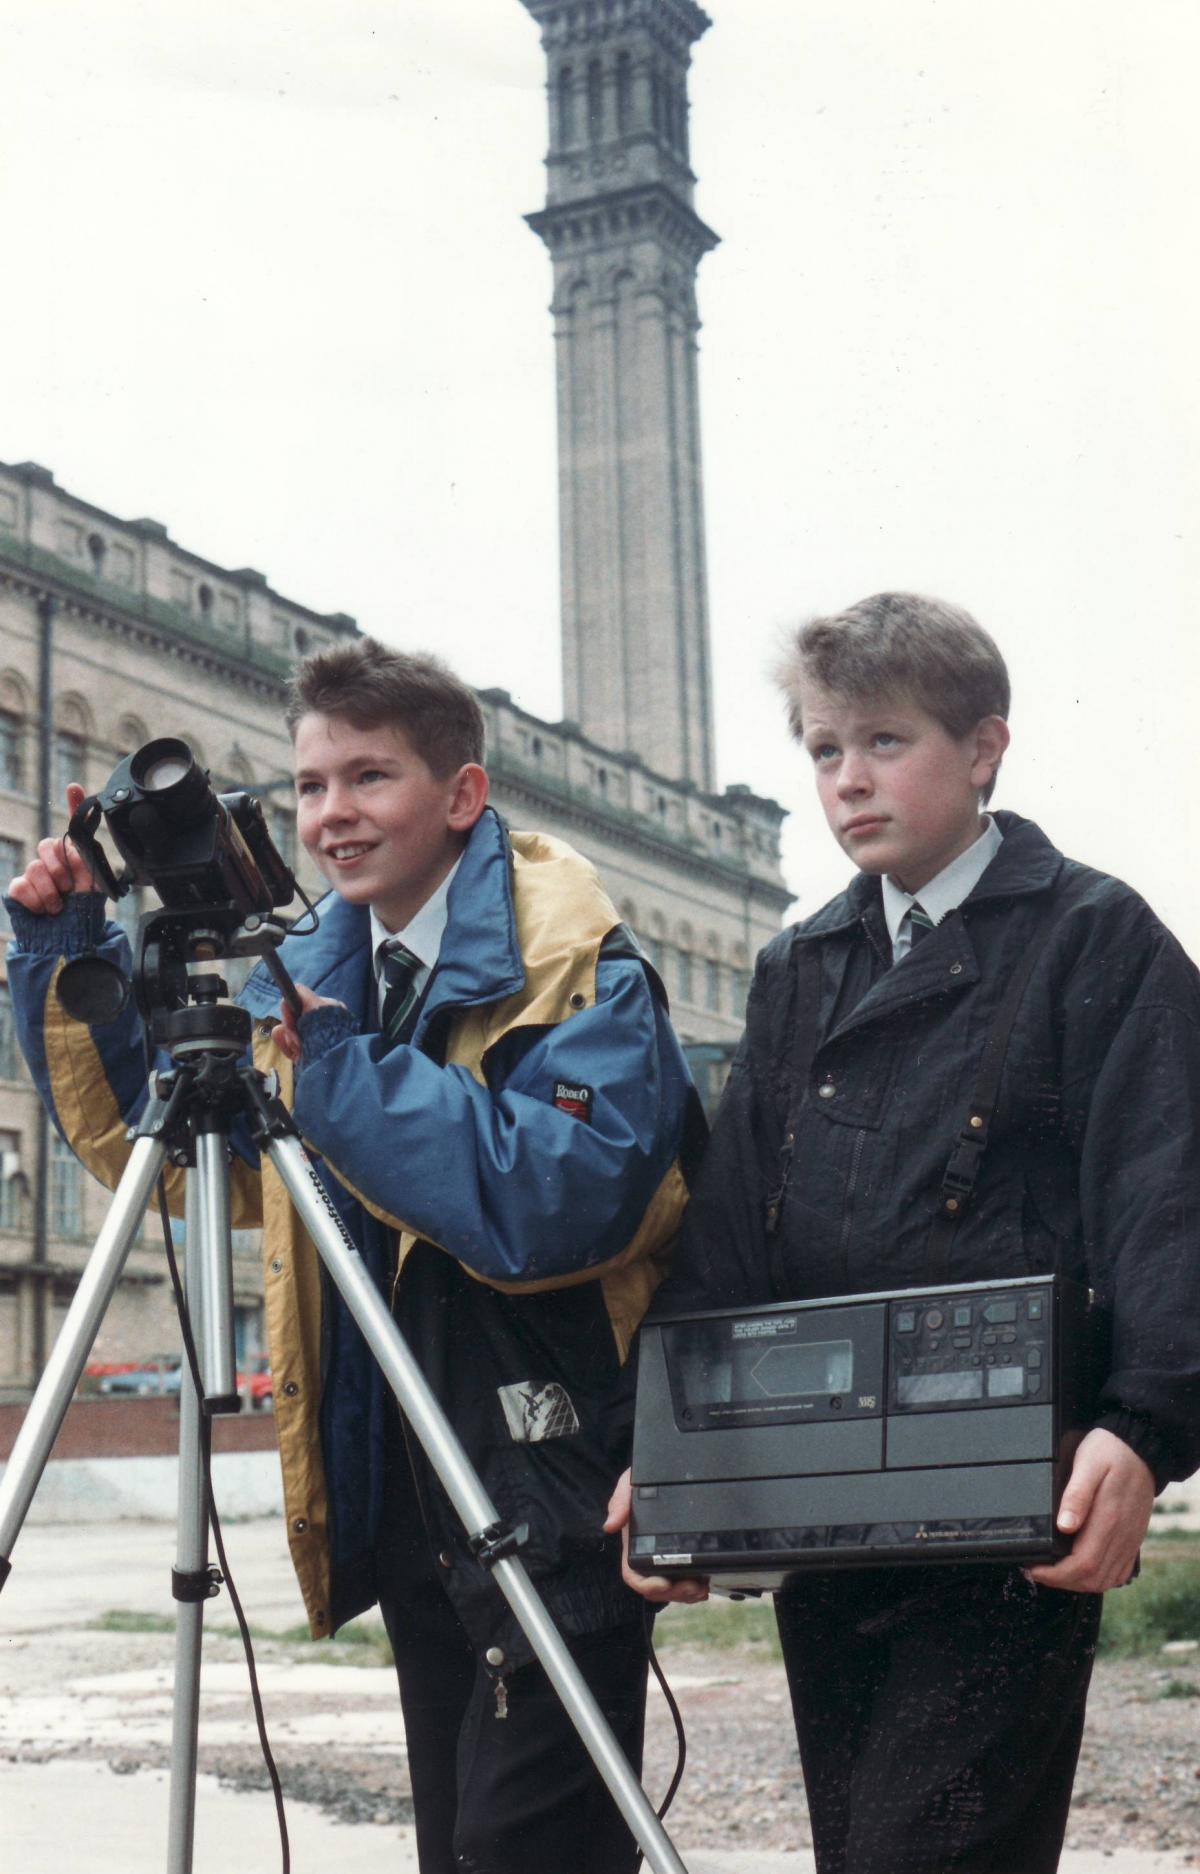 A filming project in 1991